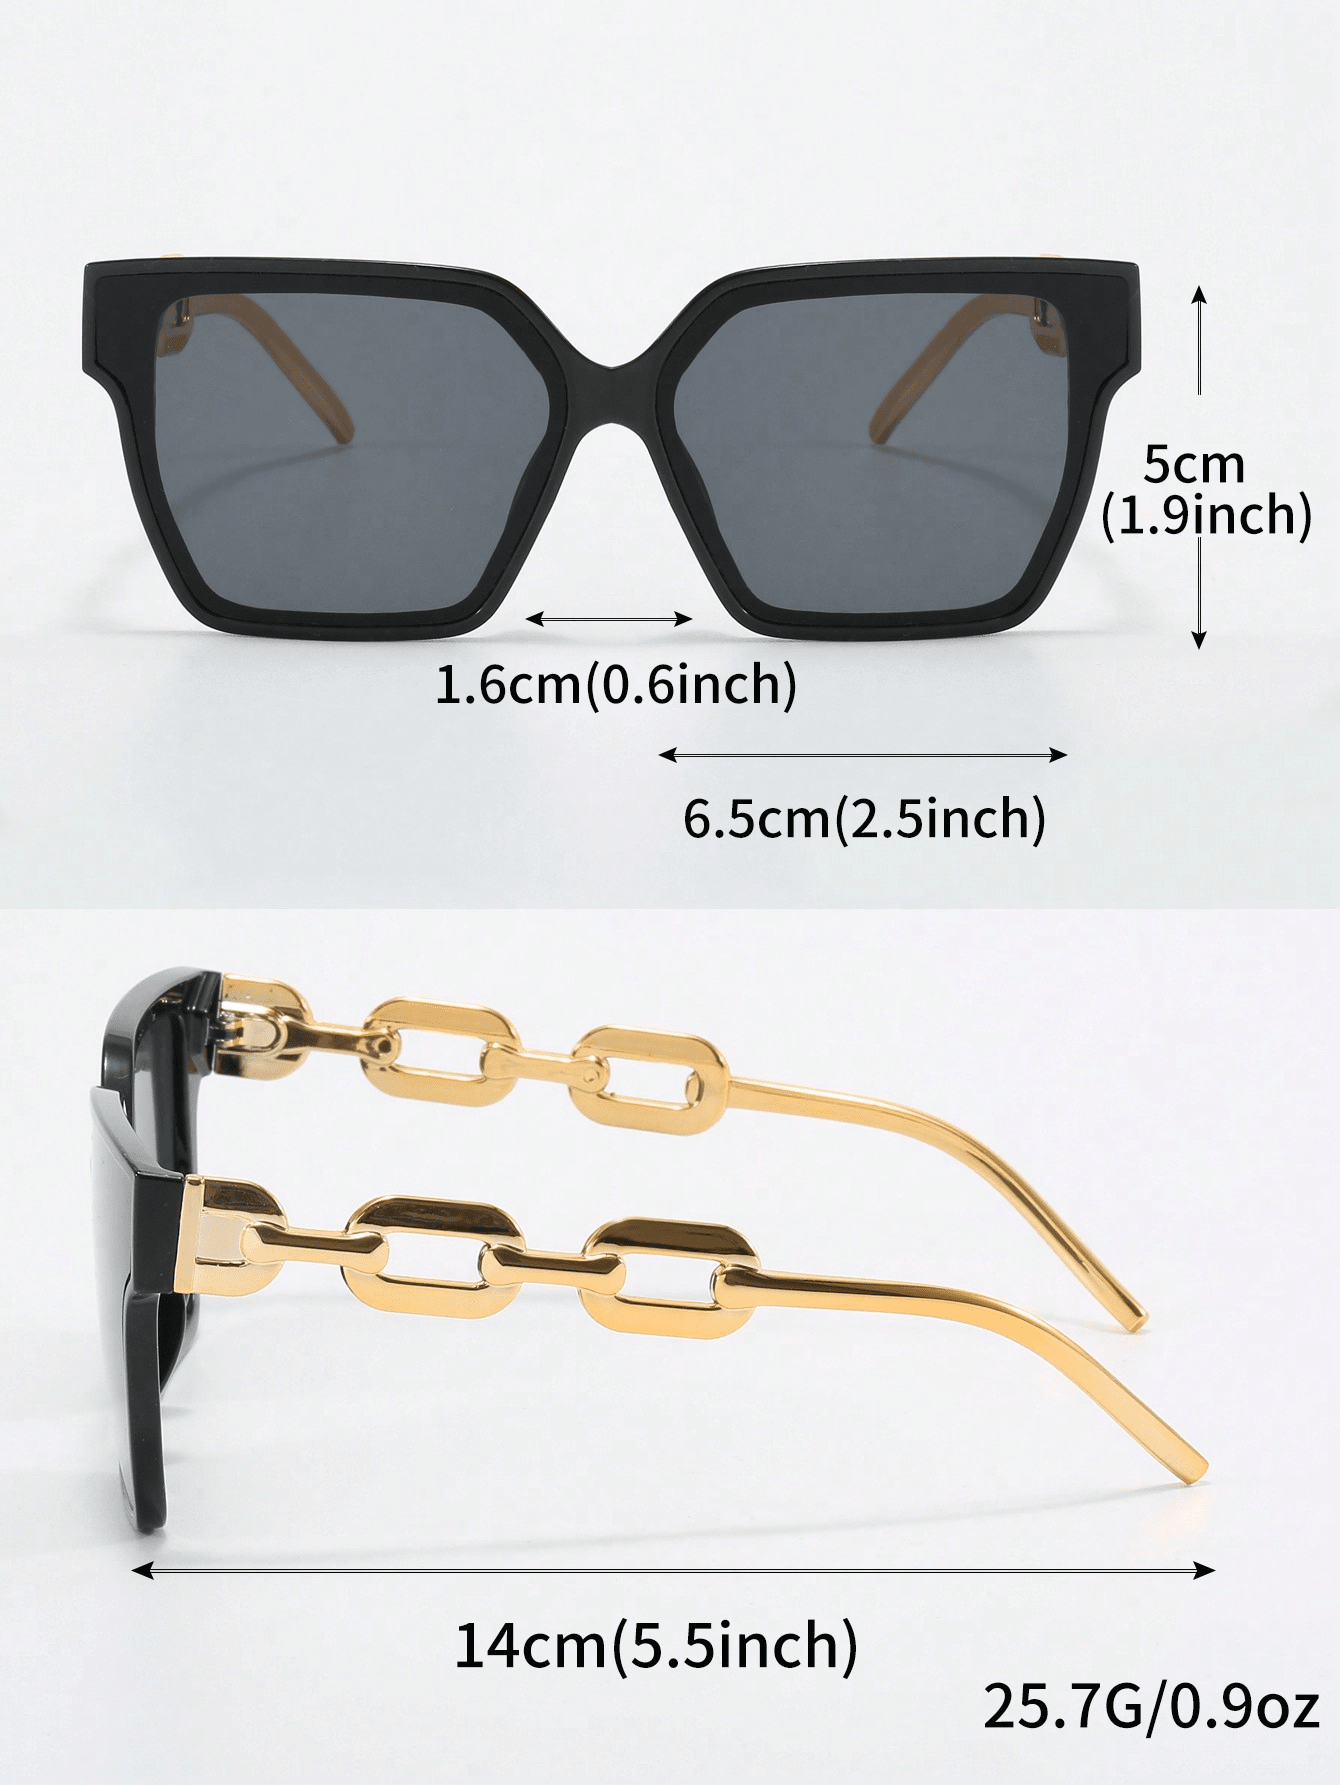 Unisex Vintage Square Frame Stylish Eyeglasses With Chain Decoration - Suitable For Fashionable Travel Street Snap And Runway